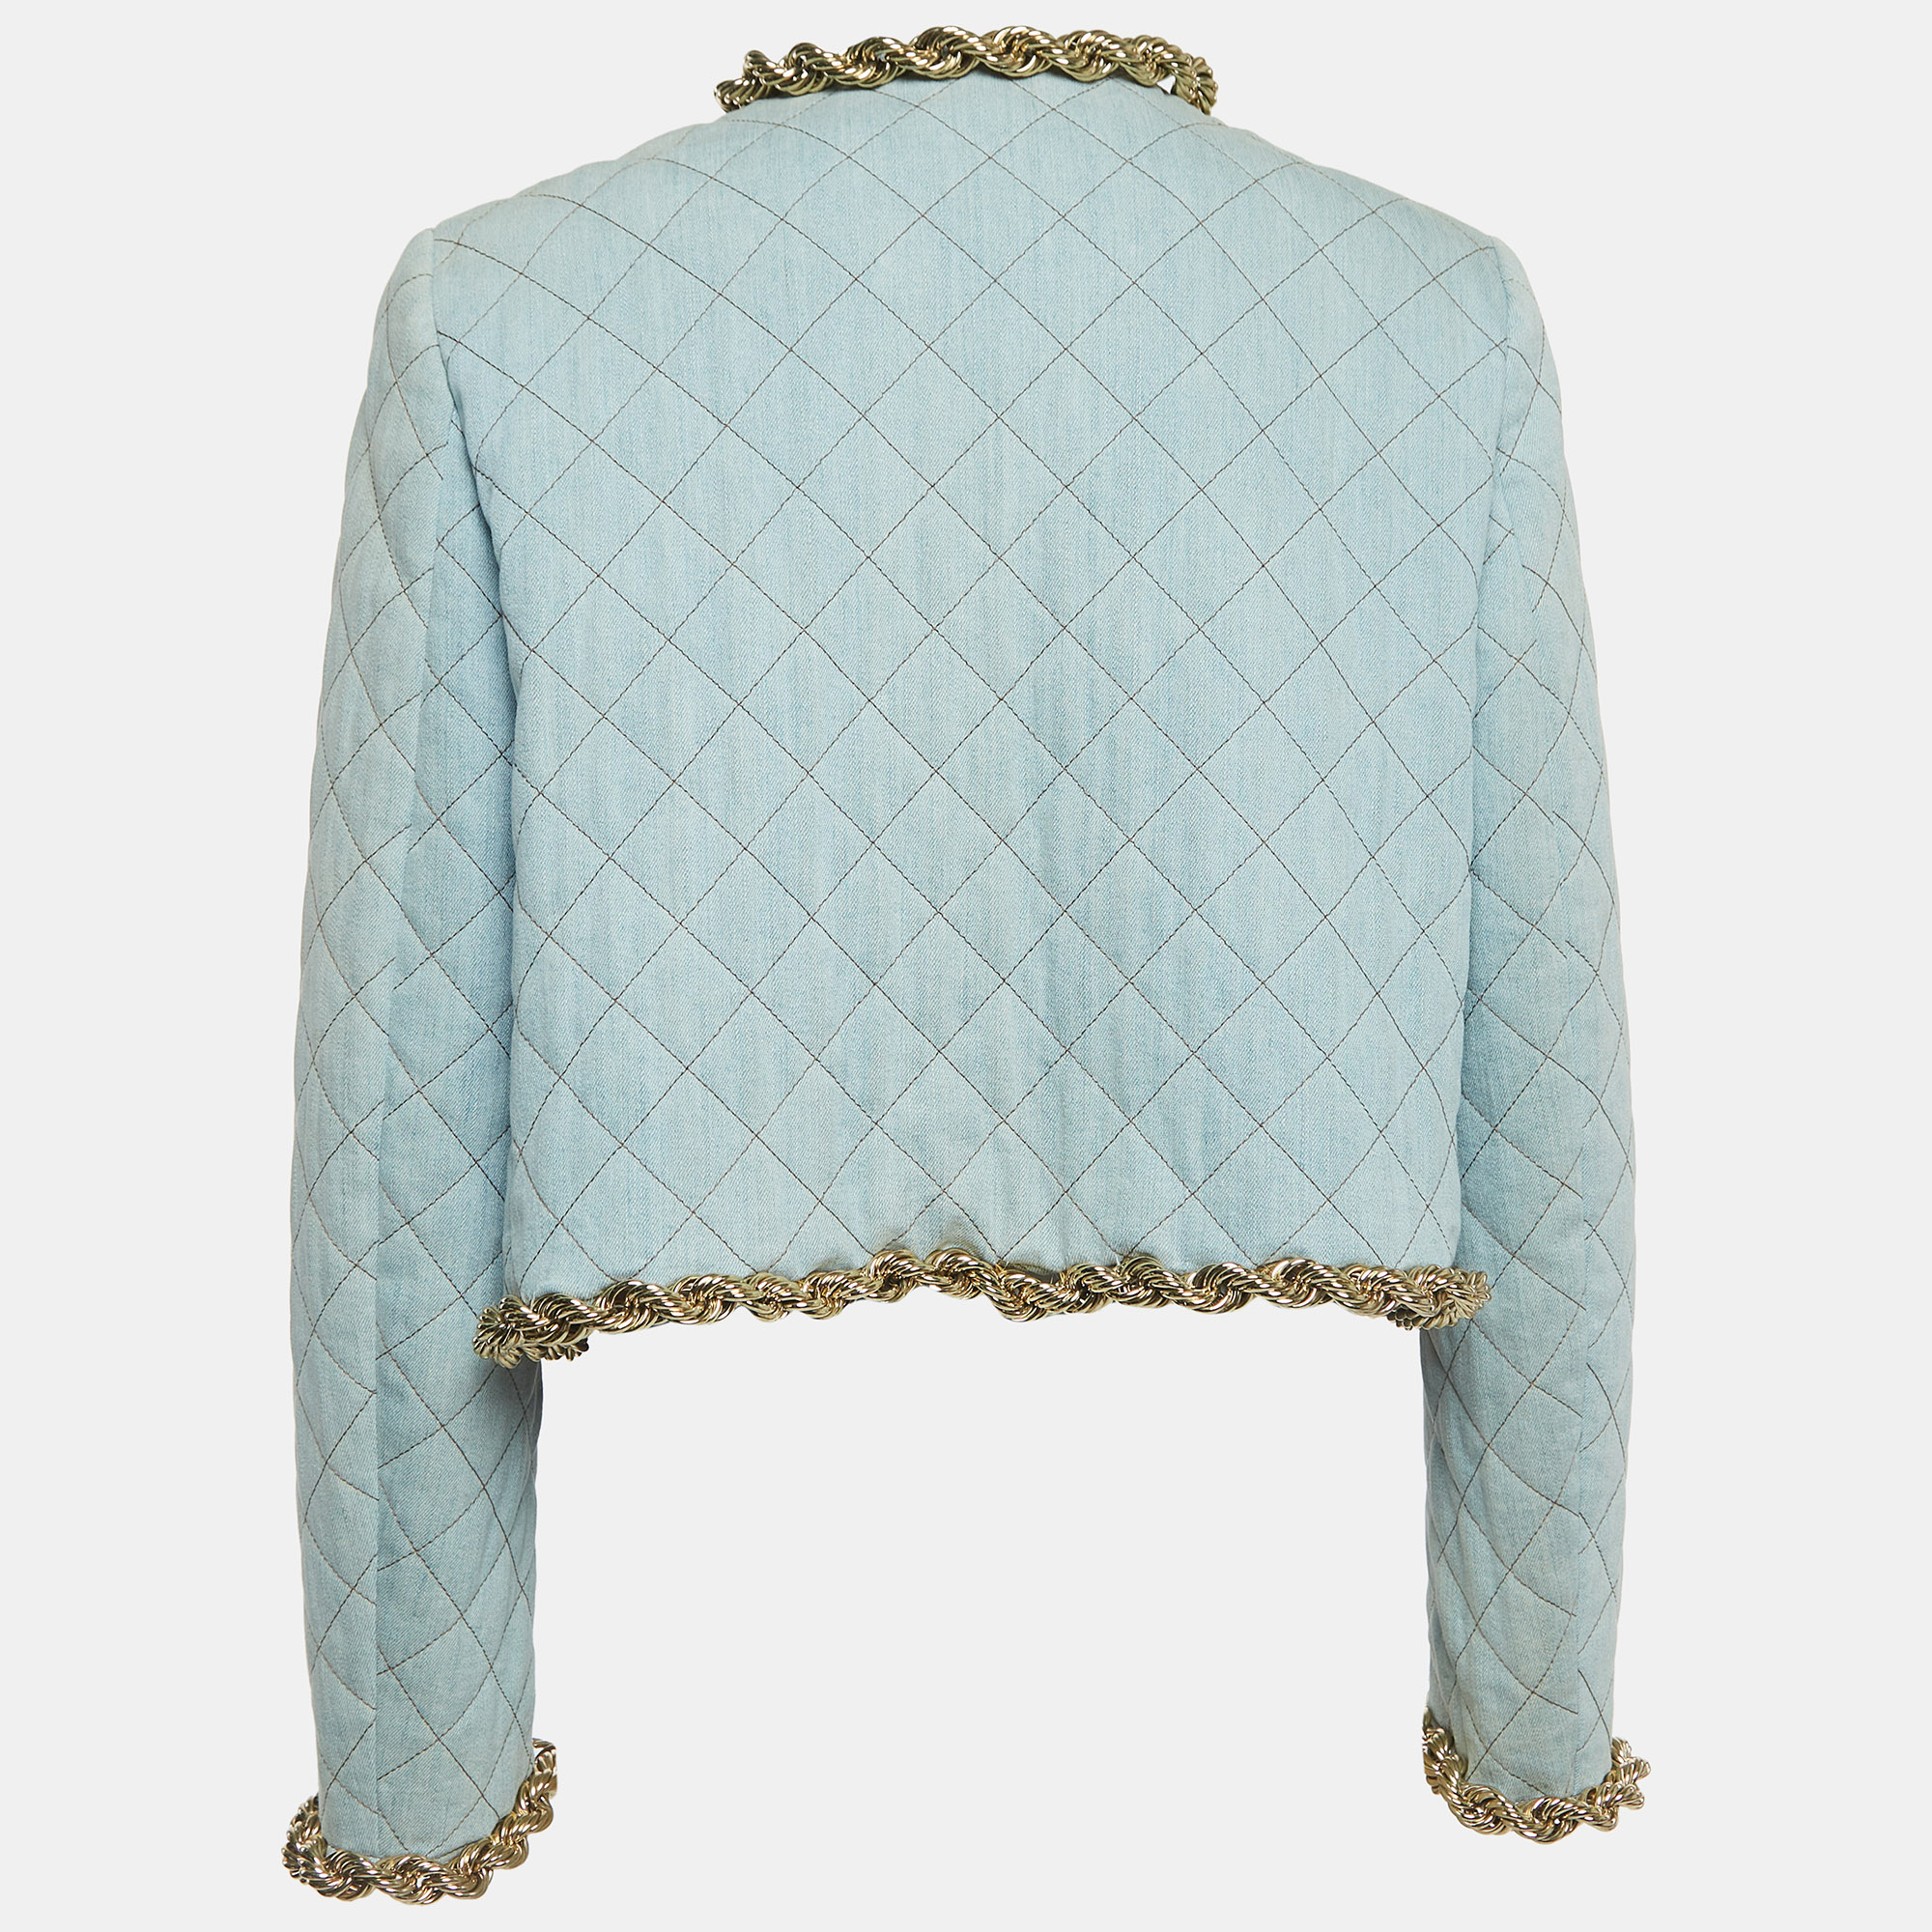 Moschino Couture Blue Faded Denim Quilted Chain Detail Jacket M